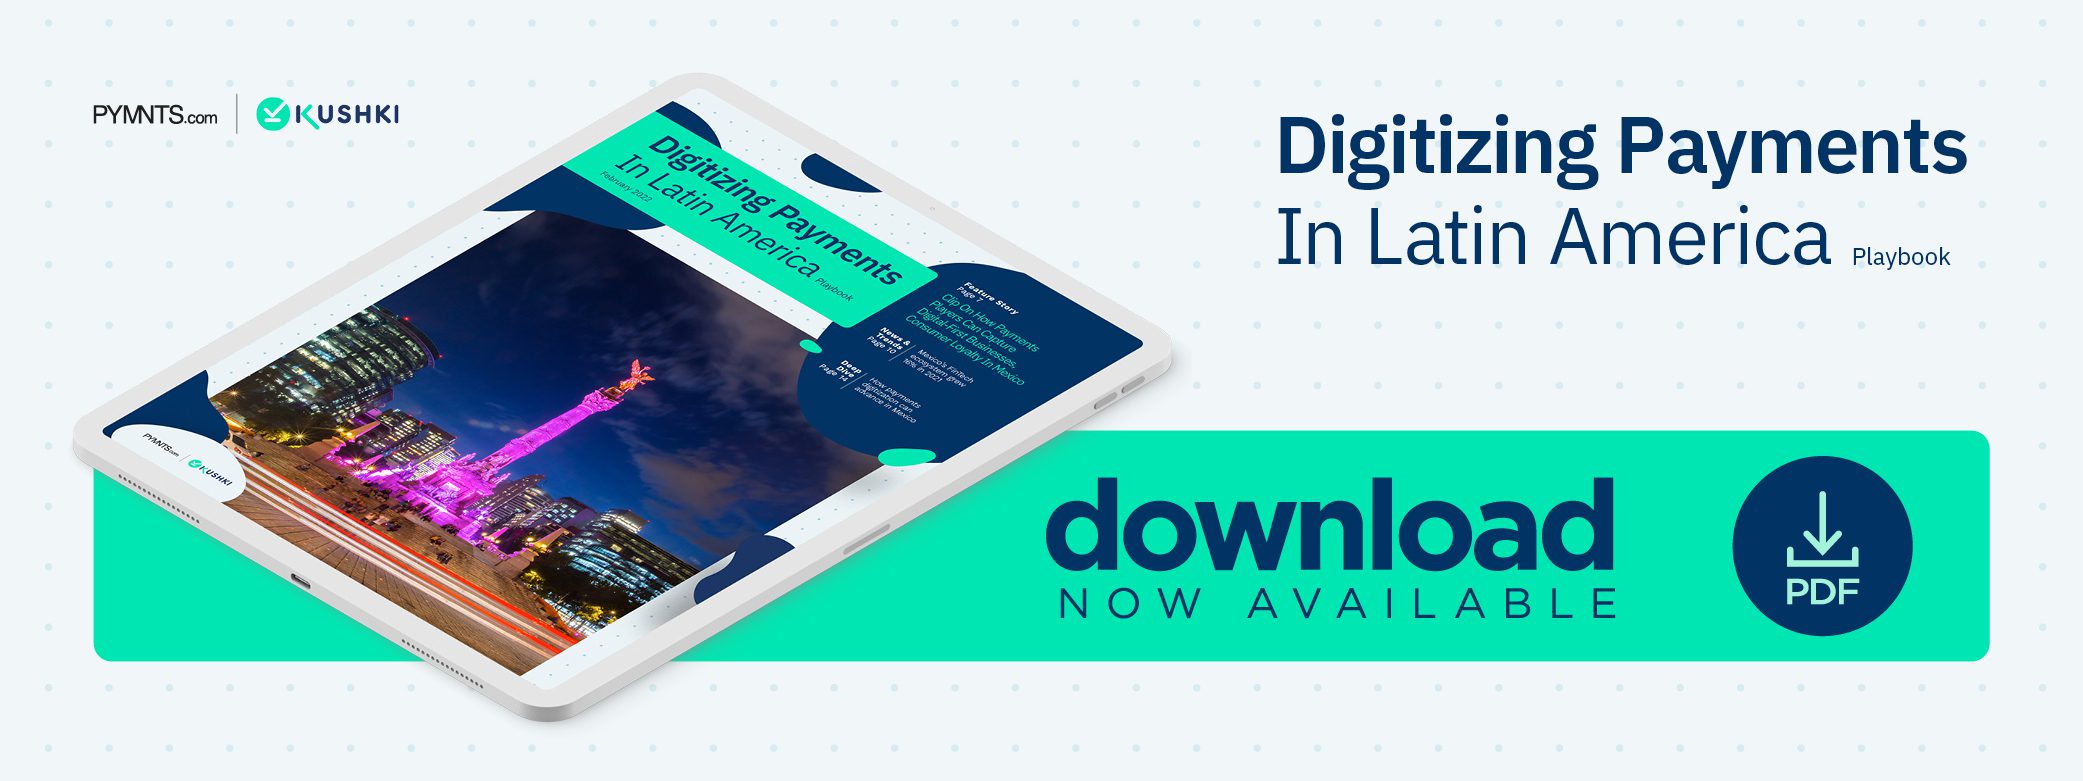 Digitizing Payments In Latin America February 2022 - Discover why payments providers can help Mexican merchants serve their consumers' growing appetites for digital payments